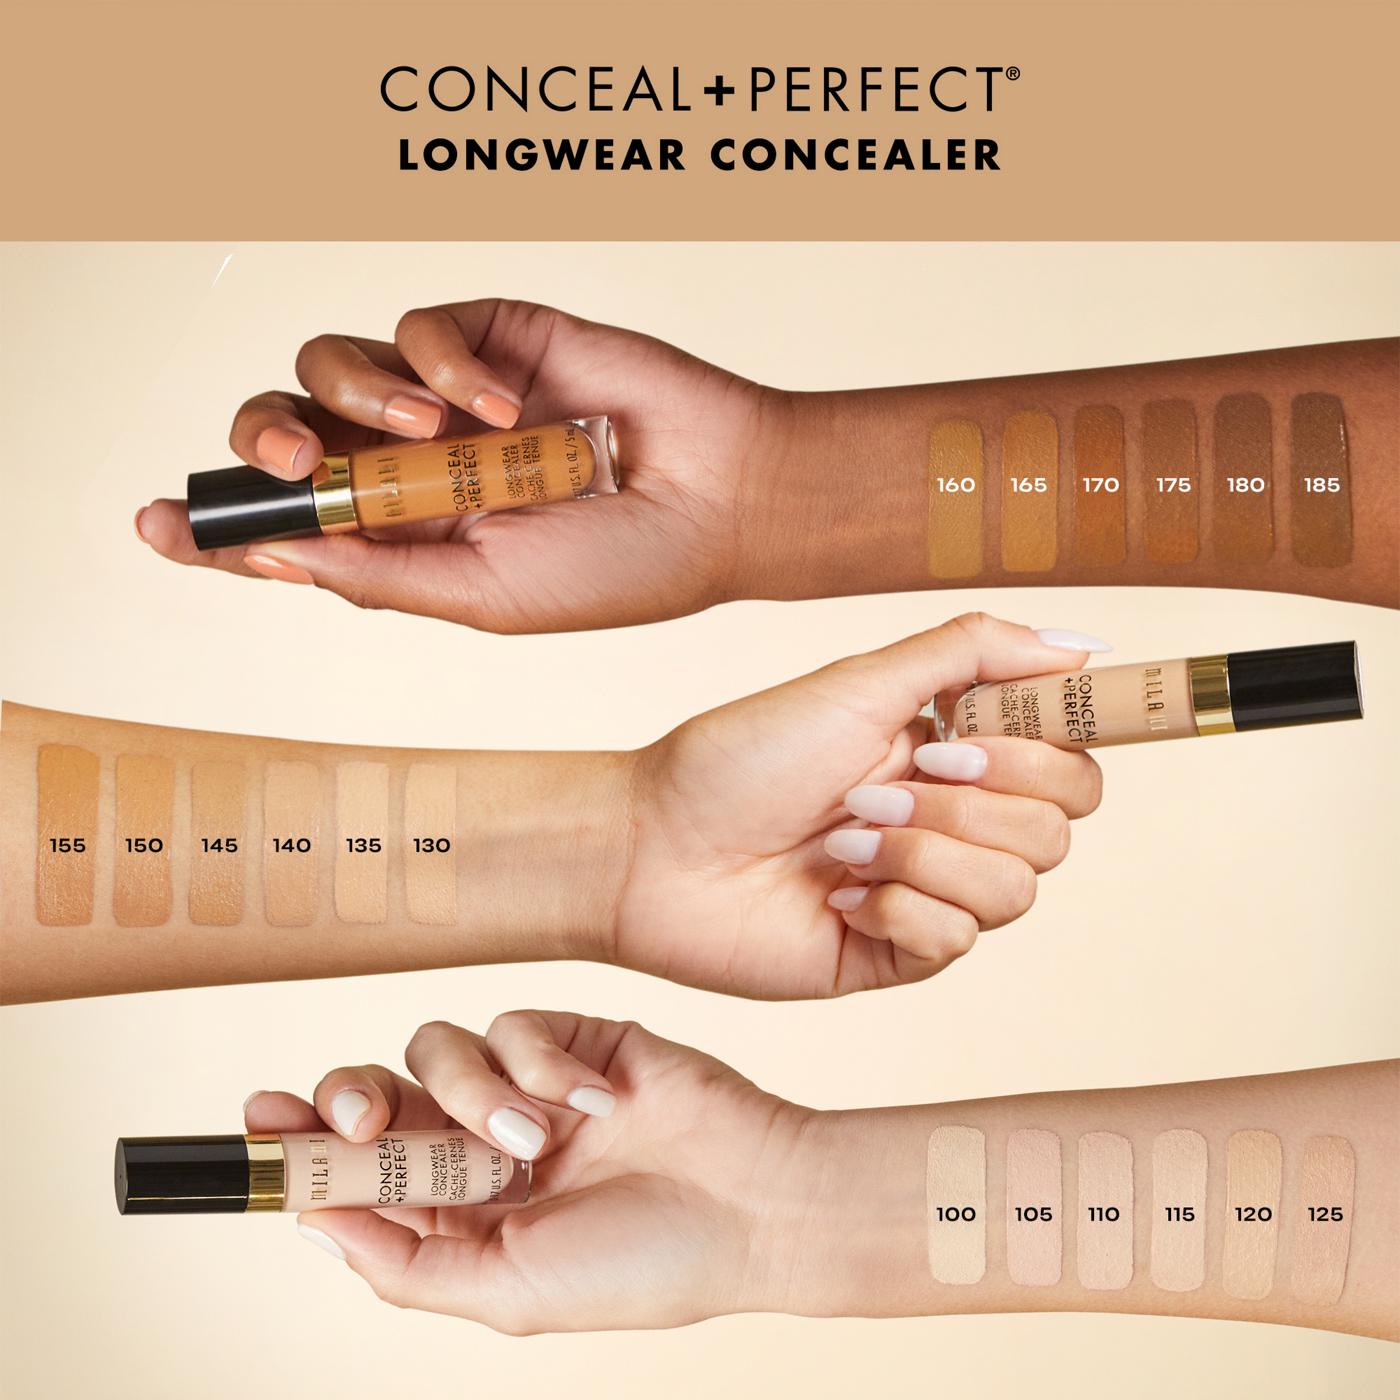 Milani Conceal +Perfect Longwear Concealer - Warm Almond; image 5 of 7